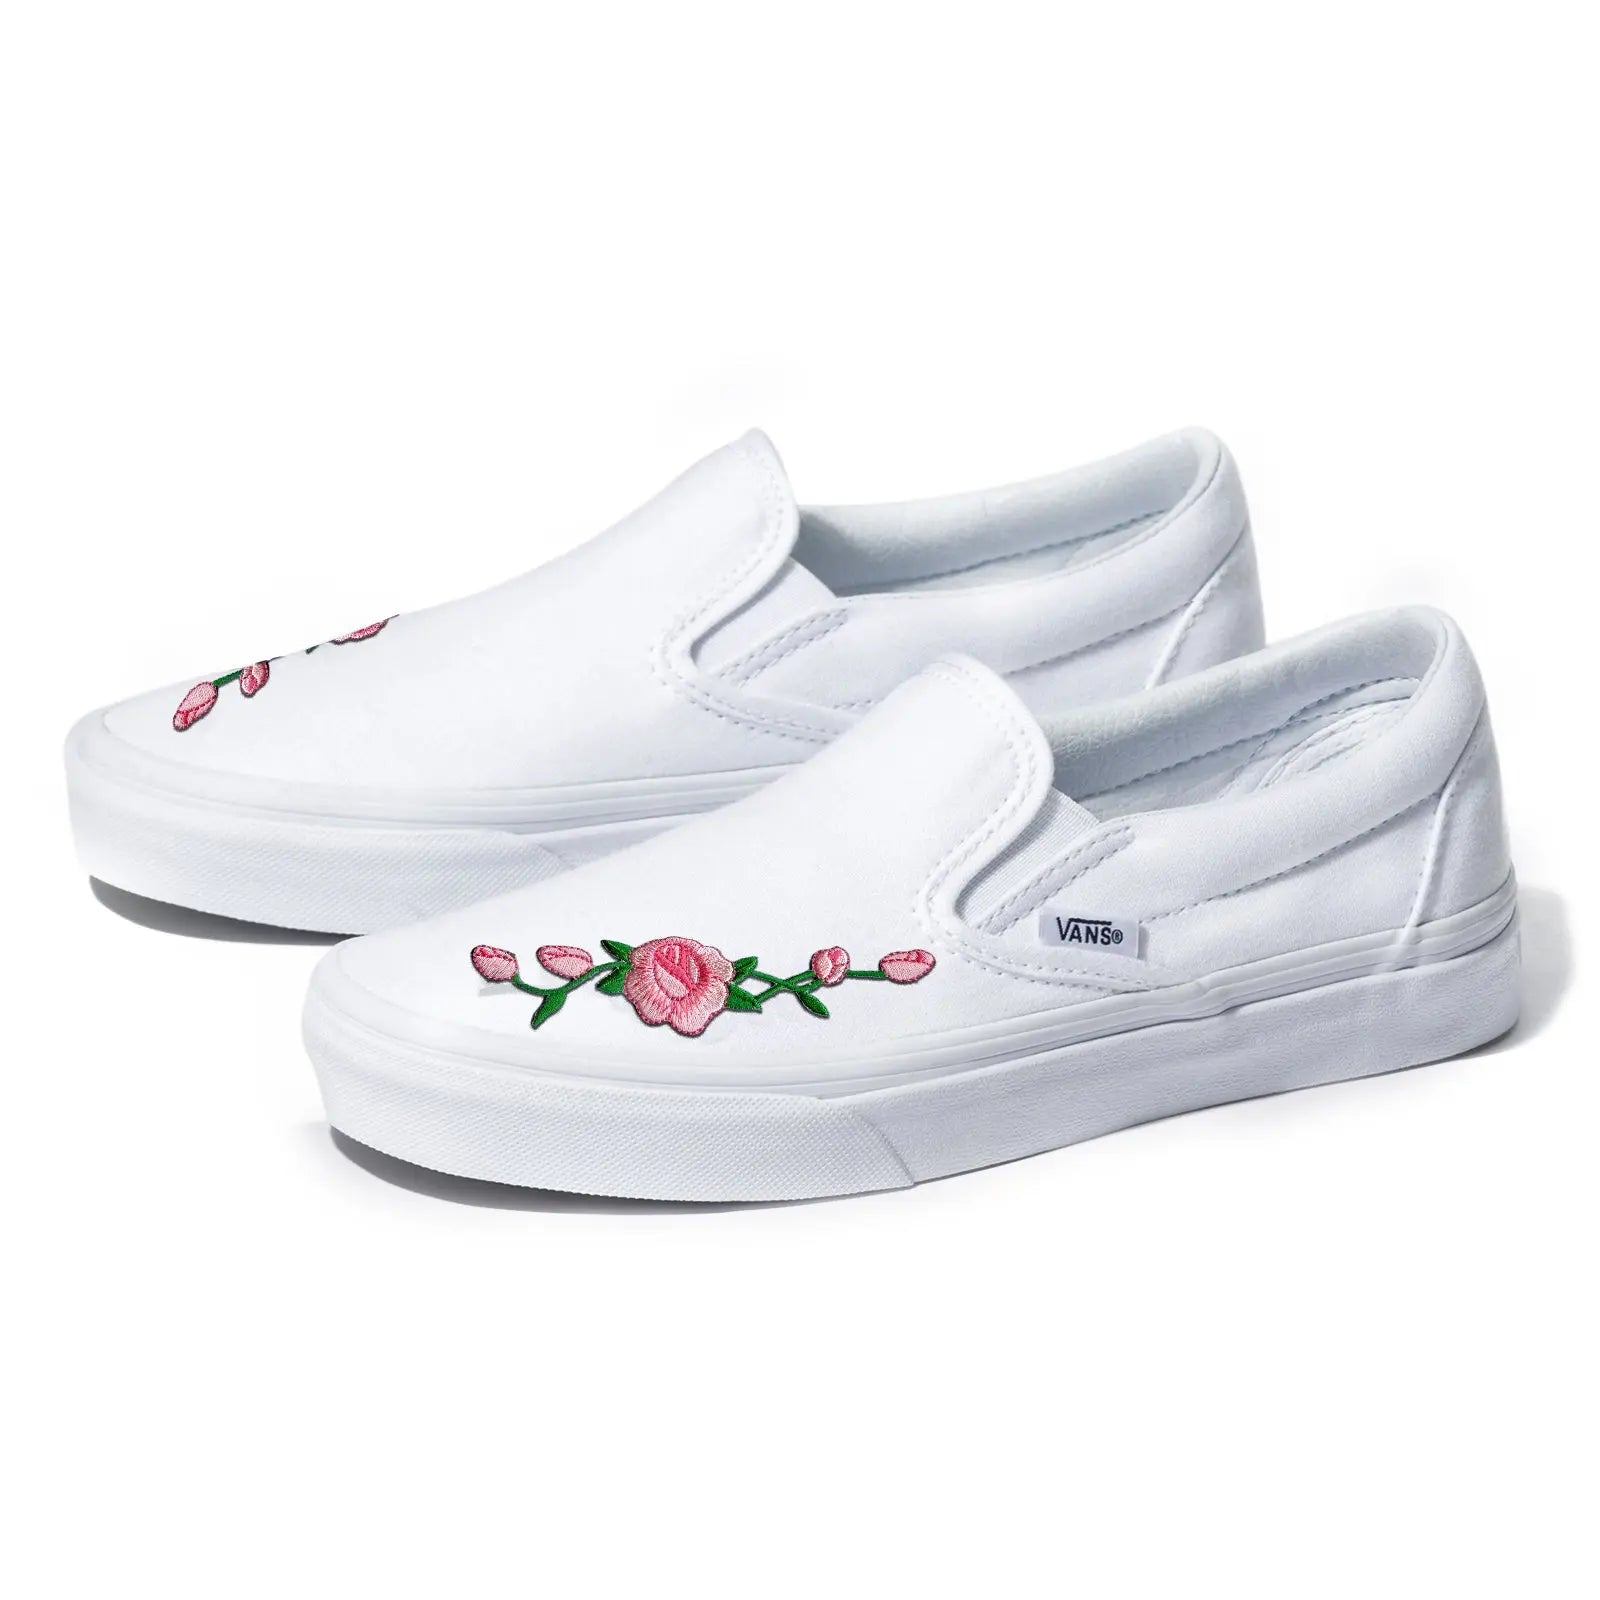 white vans with pink roses